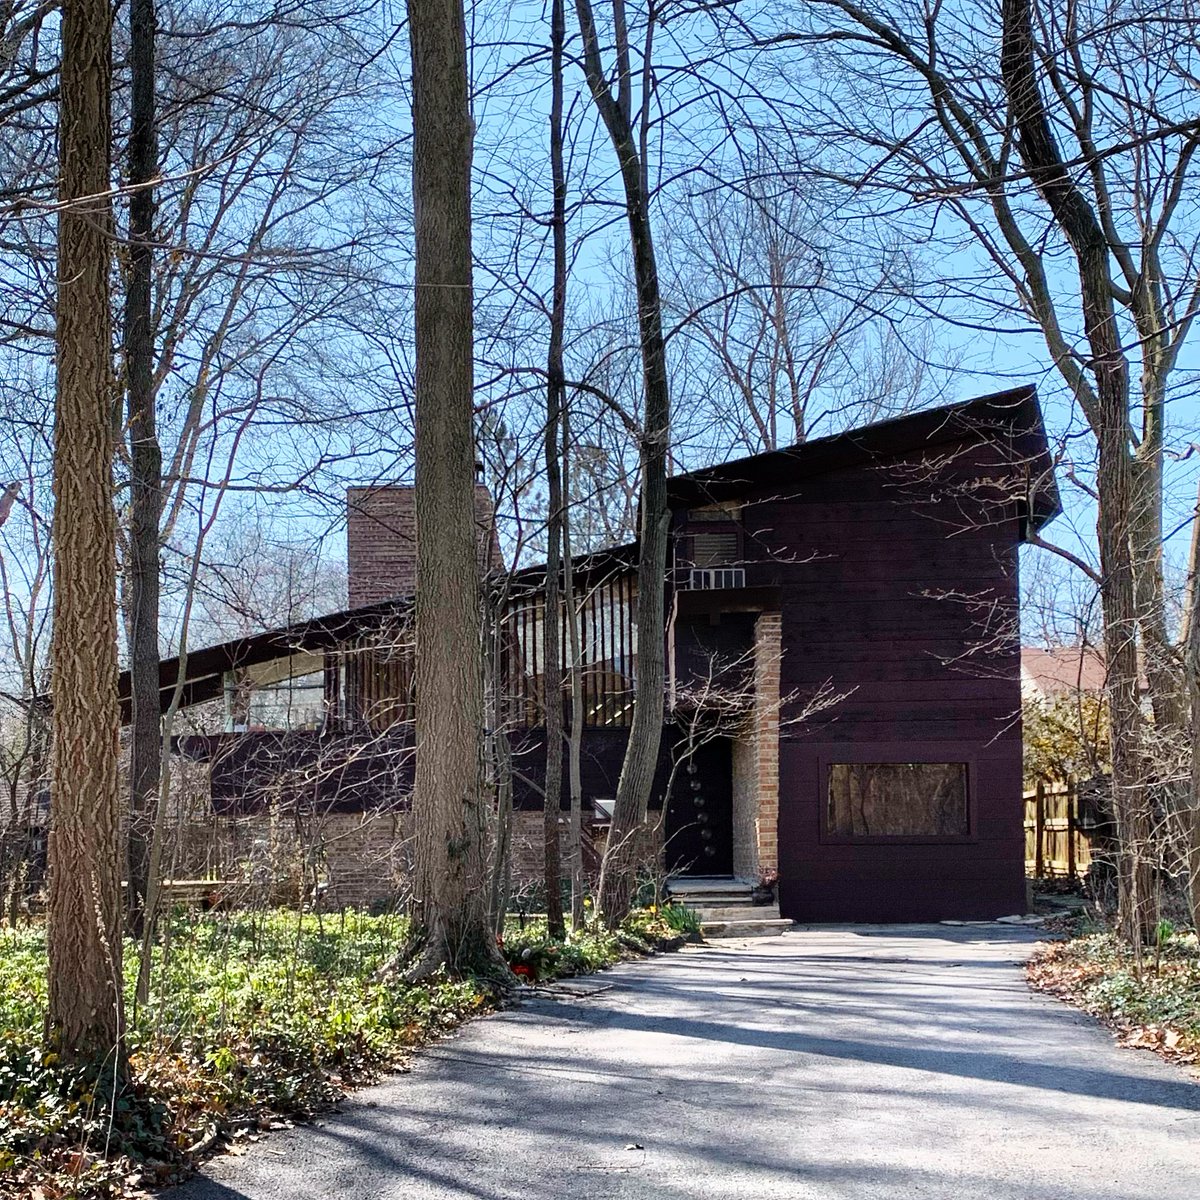 If there’s a theme to this next architectural boredom thread it’s “modernist homes built between the 1920s-60s that I really like.” Let’s get started with Bruce Goff’s Paul Colmorgan House (1939-40) in Glenview, IL. Talk about ahead of its time!